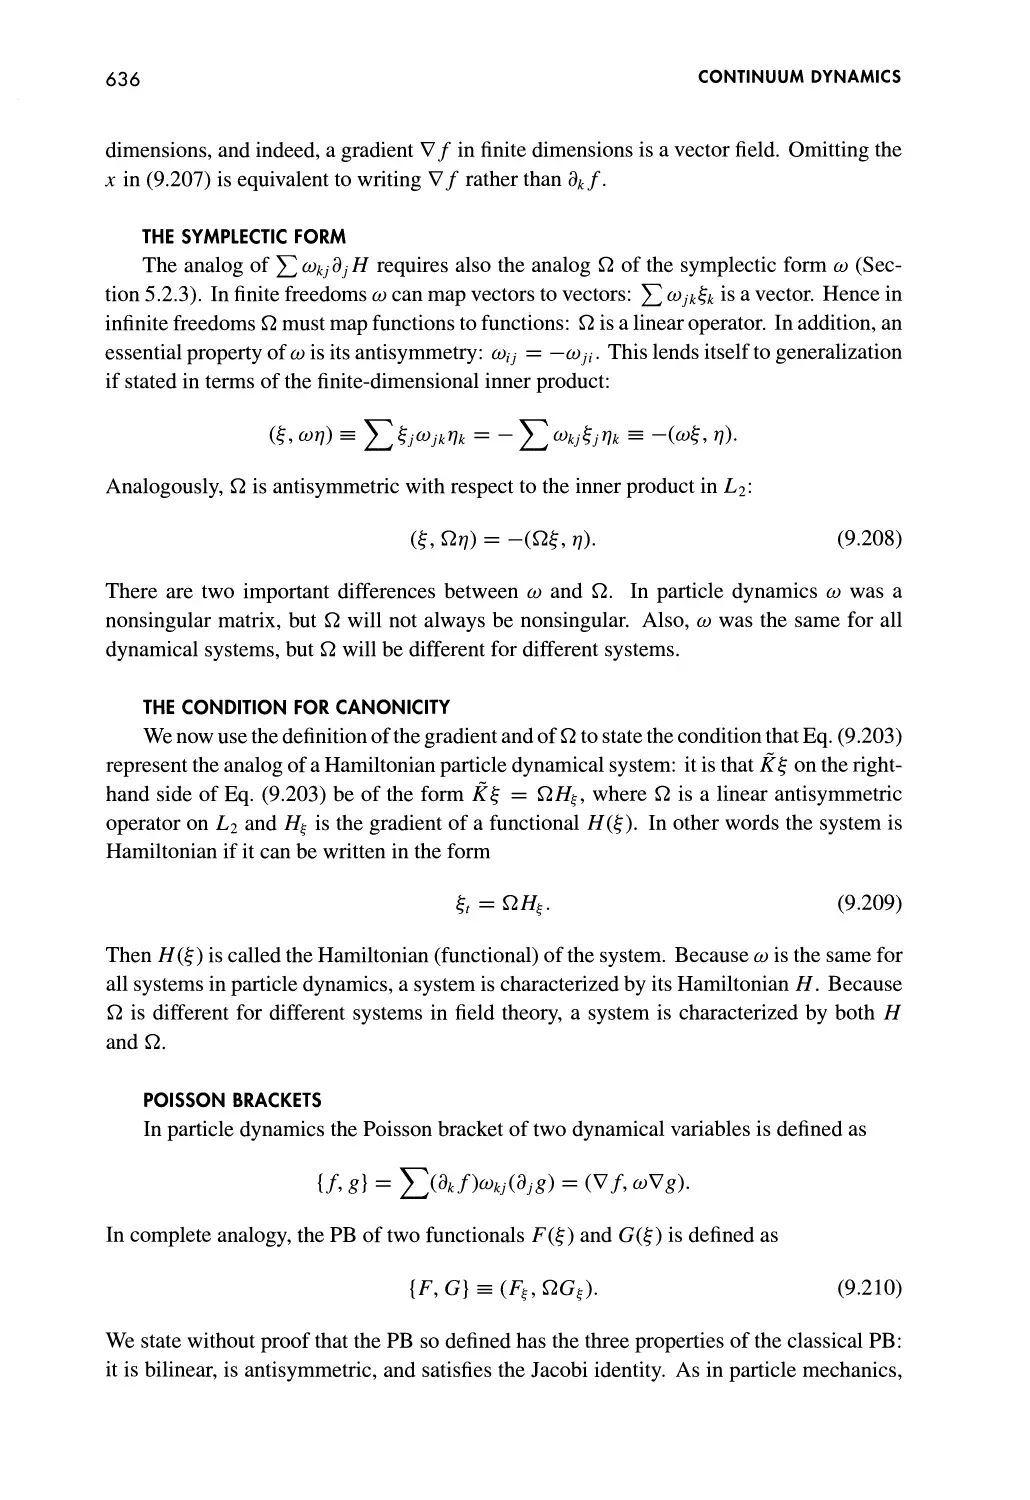 The Symplectic Form
The Condition for Canonicity
Poisson Brackets